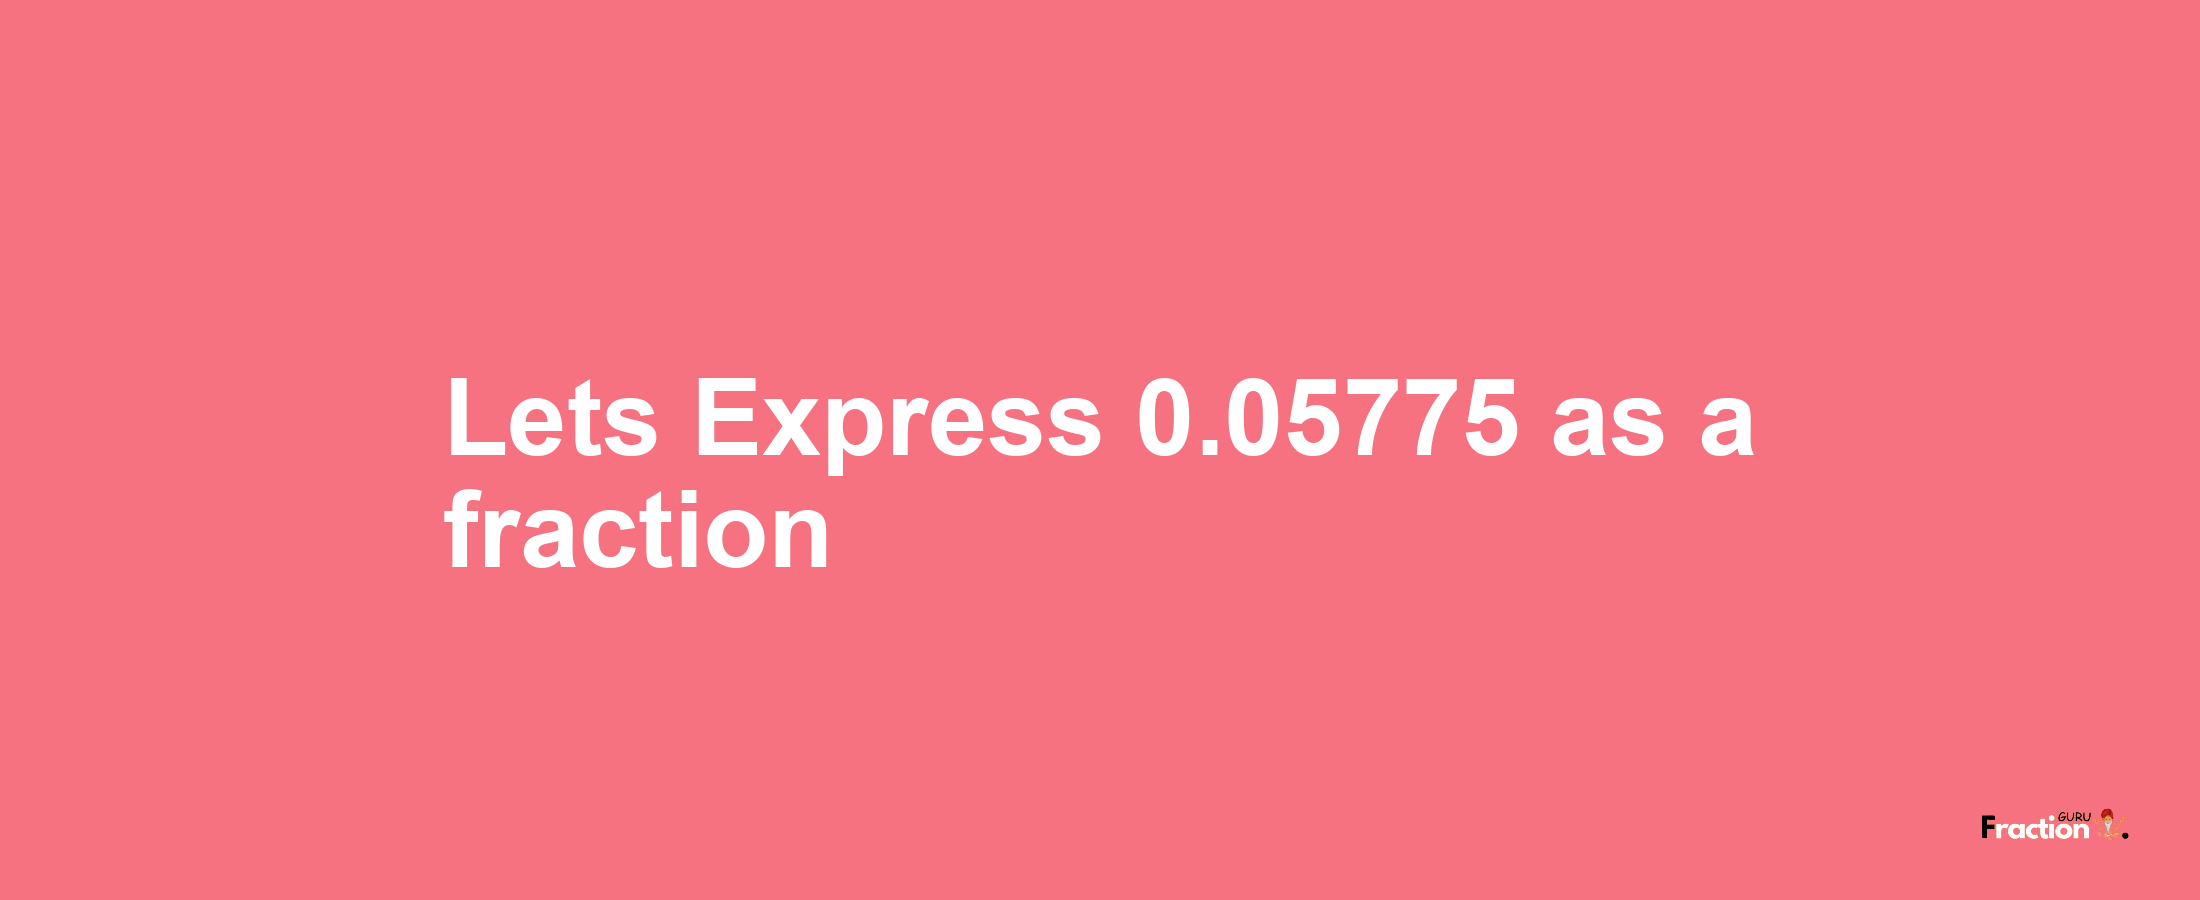 Lets Express 0.05775 as afraction